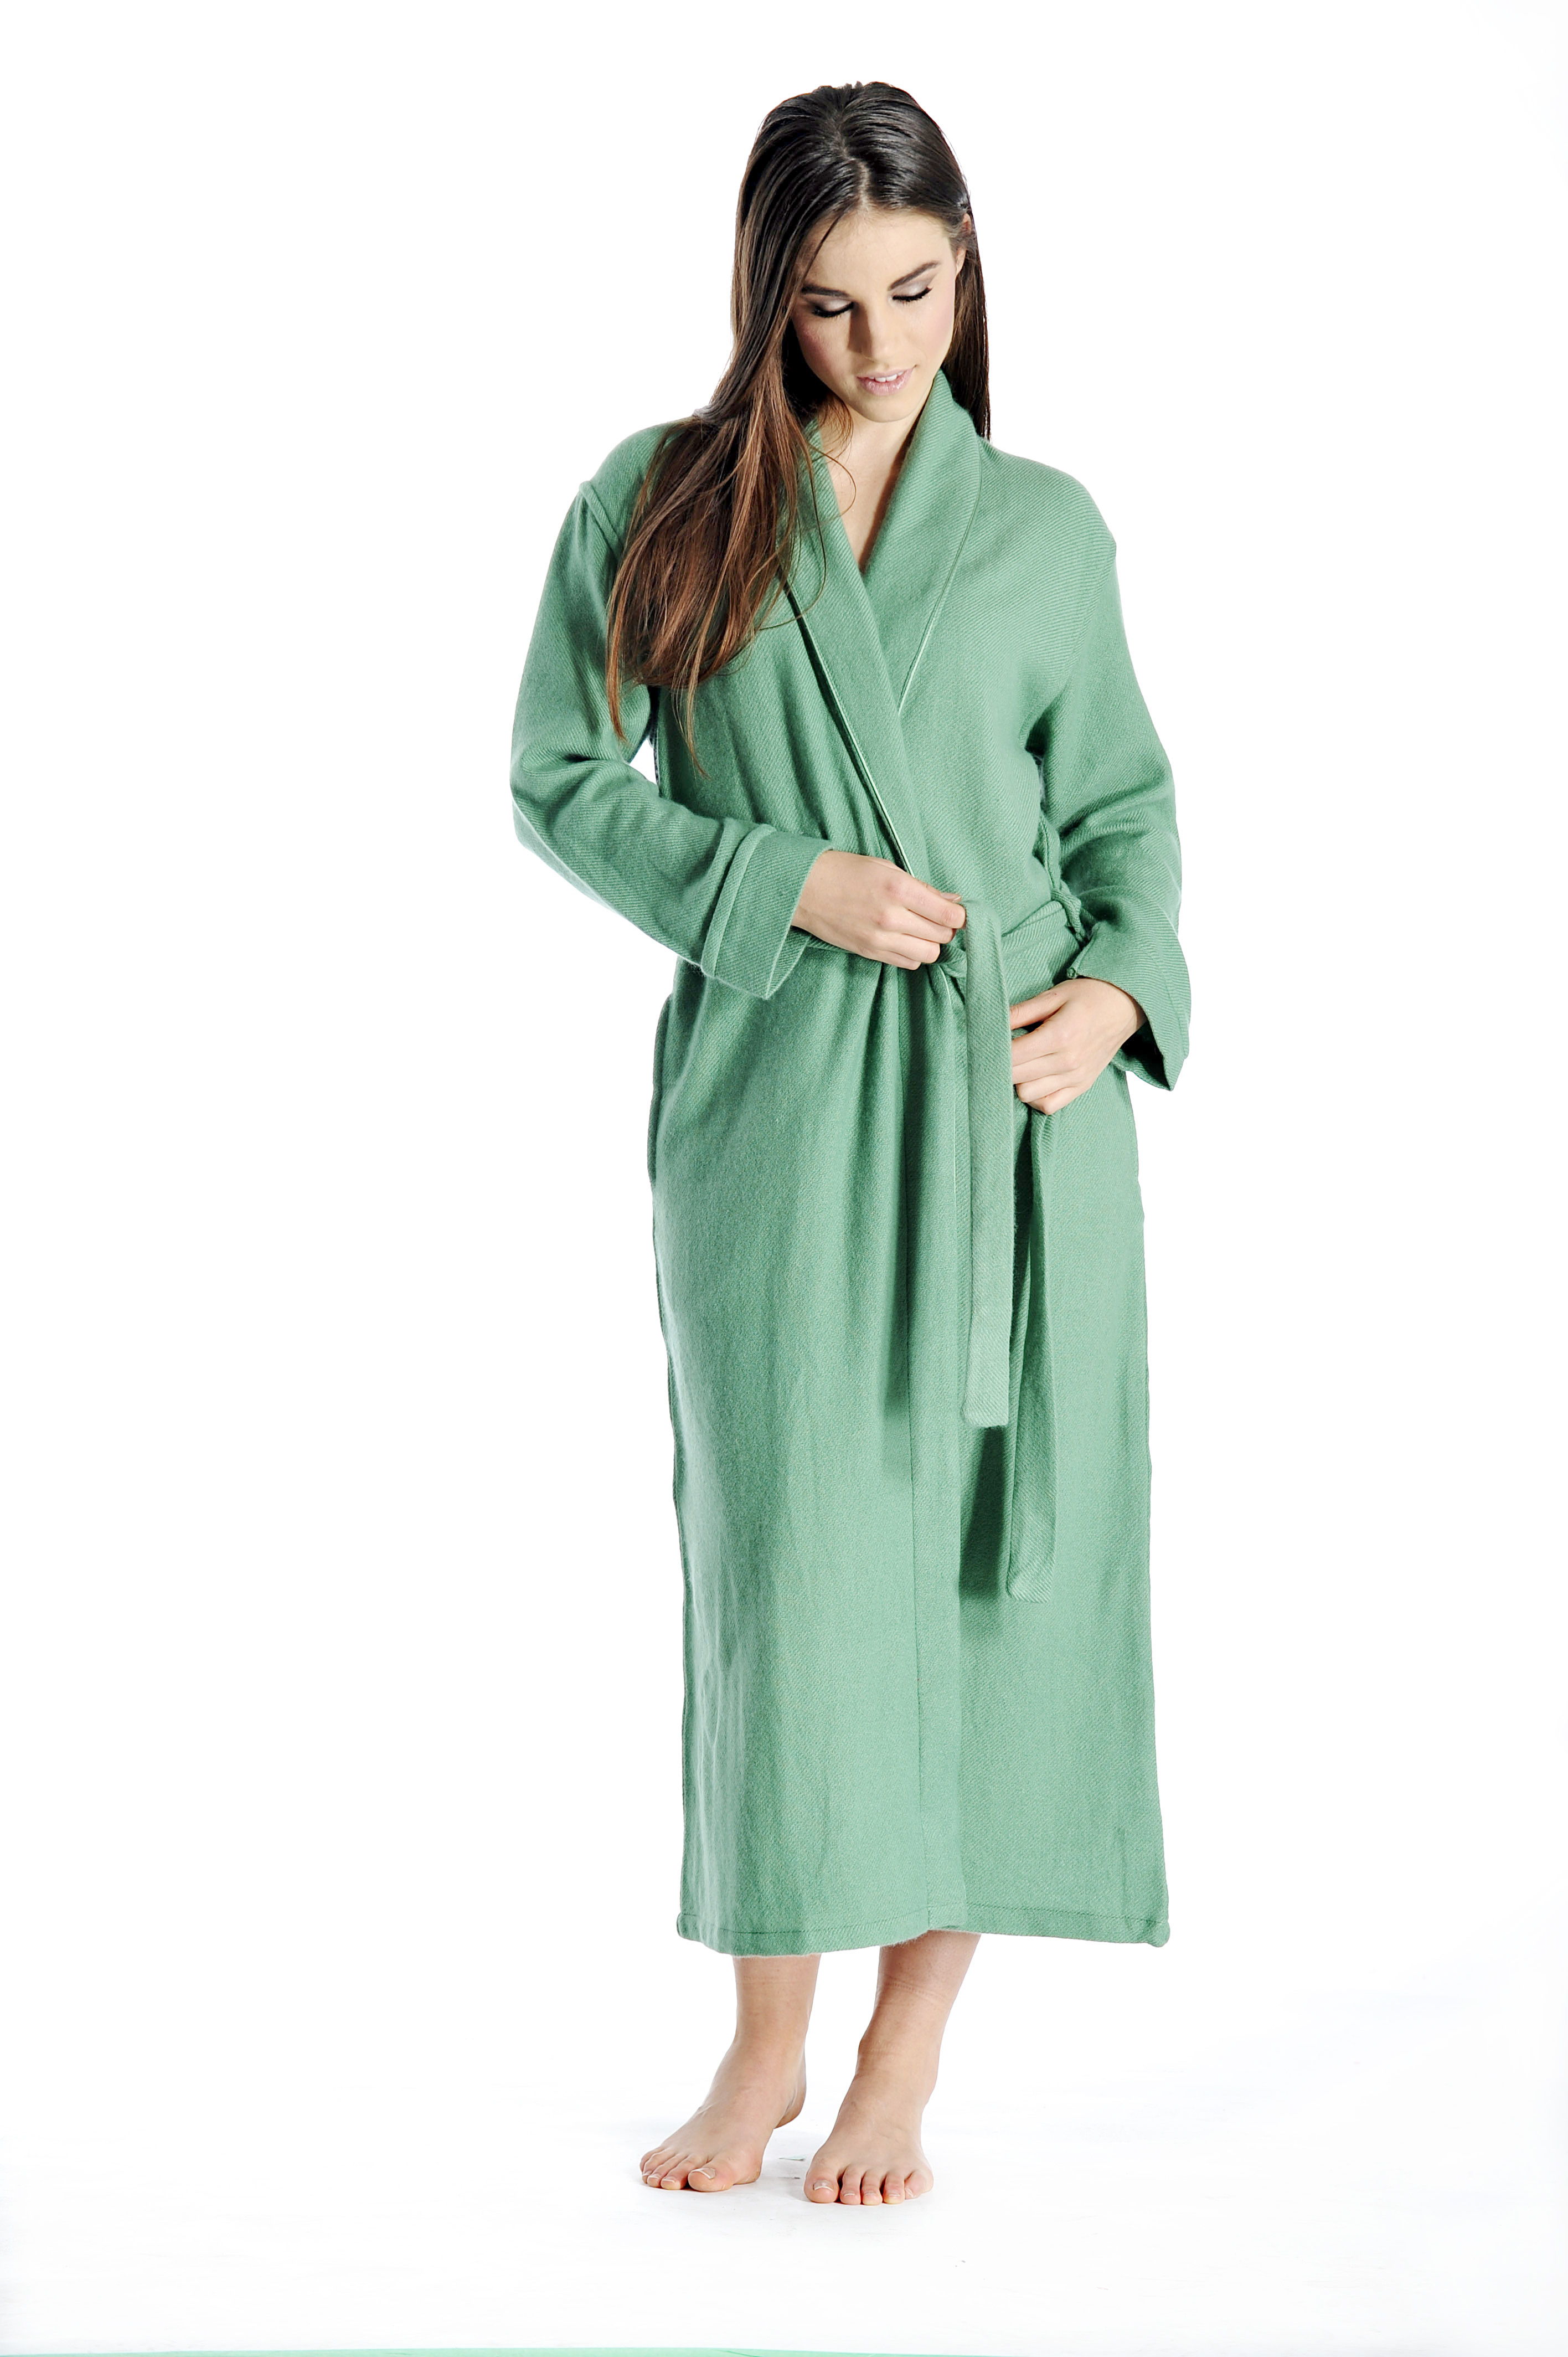 Pure Cashmere Full Length Robe for Women (Pale Peach, Small/Medium)